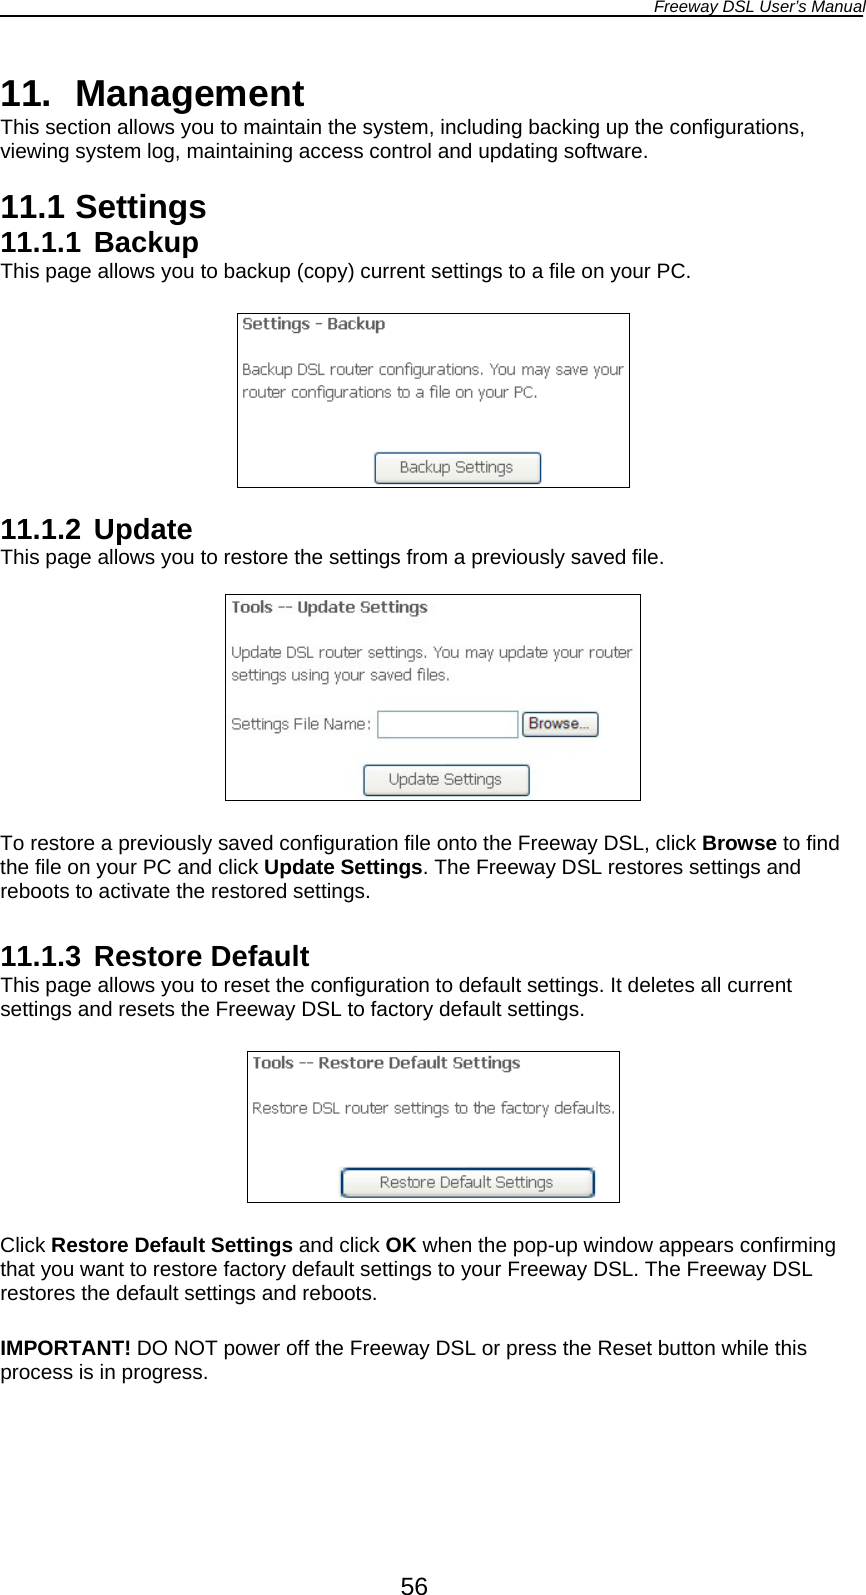 Freeway DSL User’s Manual  56 11. Management This section allows you to maintain the system, including backing up the configurations, viewing system log, maintaining access control and updating software.  11.1 Settings 11.1.1 Backup This page allows you to backup (copy) current settings to a file on your PC.    11.1.2 Update This page allows you to restore the settings from a previously saved file.    To restore a previously saved configuration file onto the Freeway DSL, click Browse to find the file on your PC and click Update Settings. The Freeway DSL restores settings and reboots to activate the restored settings.  11.1.3 Restore Default This page allows you to reset the configuration to default settings. It deletes all current settings and resets the Freeway DSL to factory default settings.    Click Restore Default Settings and click OK when the pop-up window appears confirming that you want to restore factory default settings to your Freeway DSL. The Freeway DSL restores the default settings and reboots.  IMPORTANT! DO NOT power off the Freeway DSL or press the Reset button while this process is in progress.  